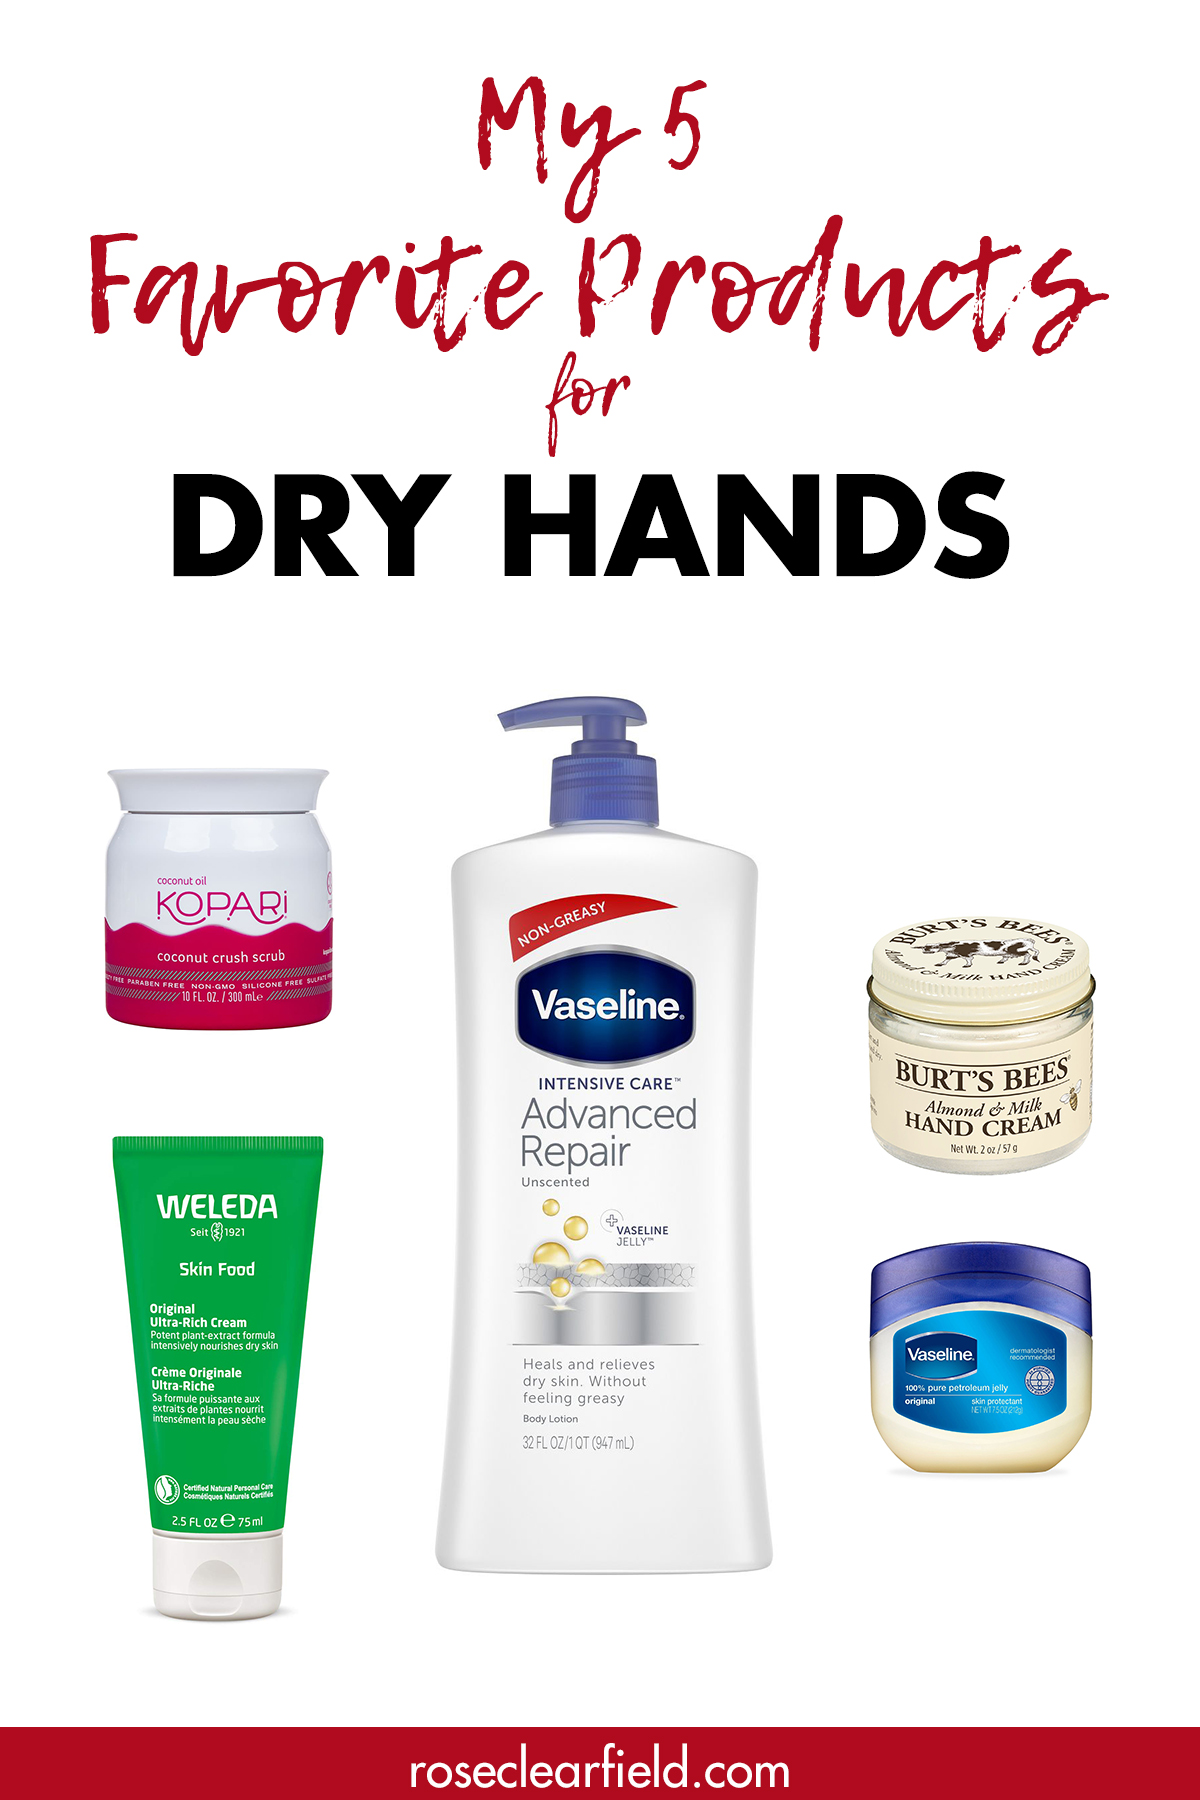 My 5 Favorite Products for Dry Hands